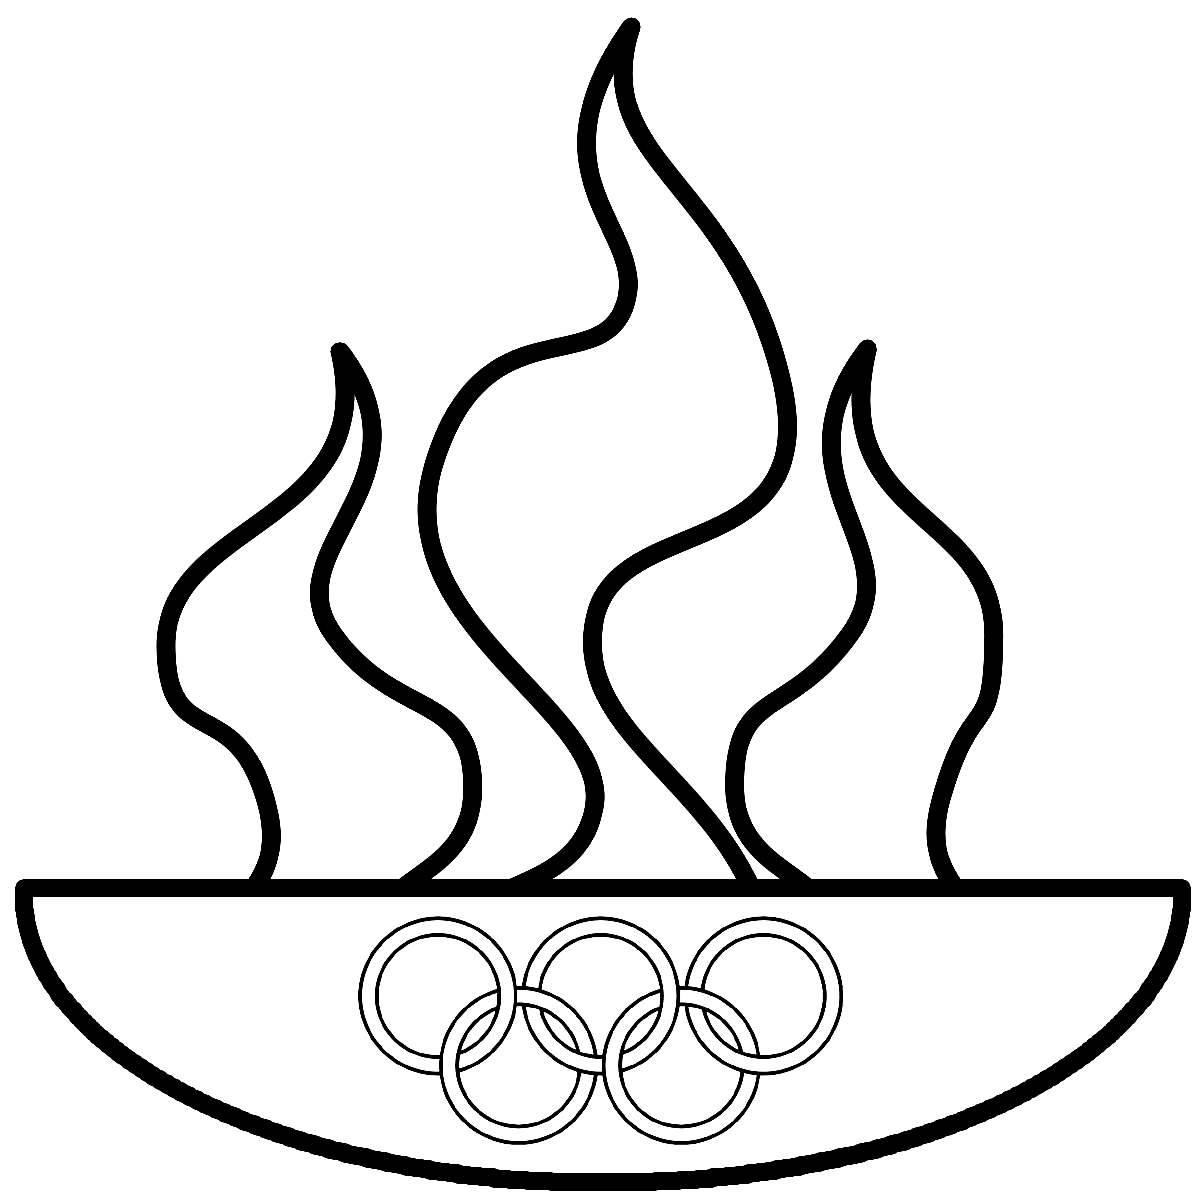 Olympic Flame Coloring Page